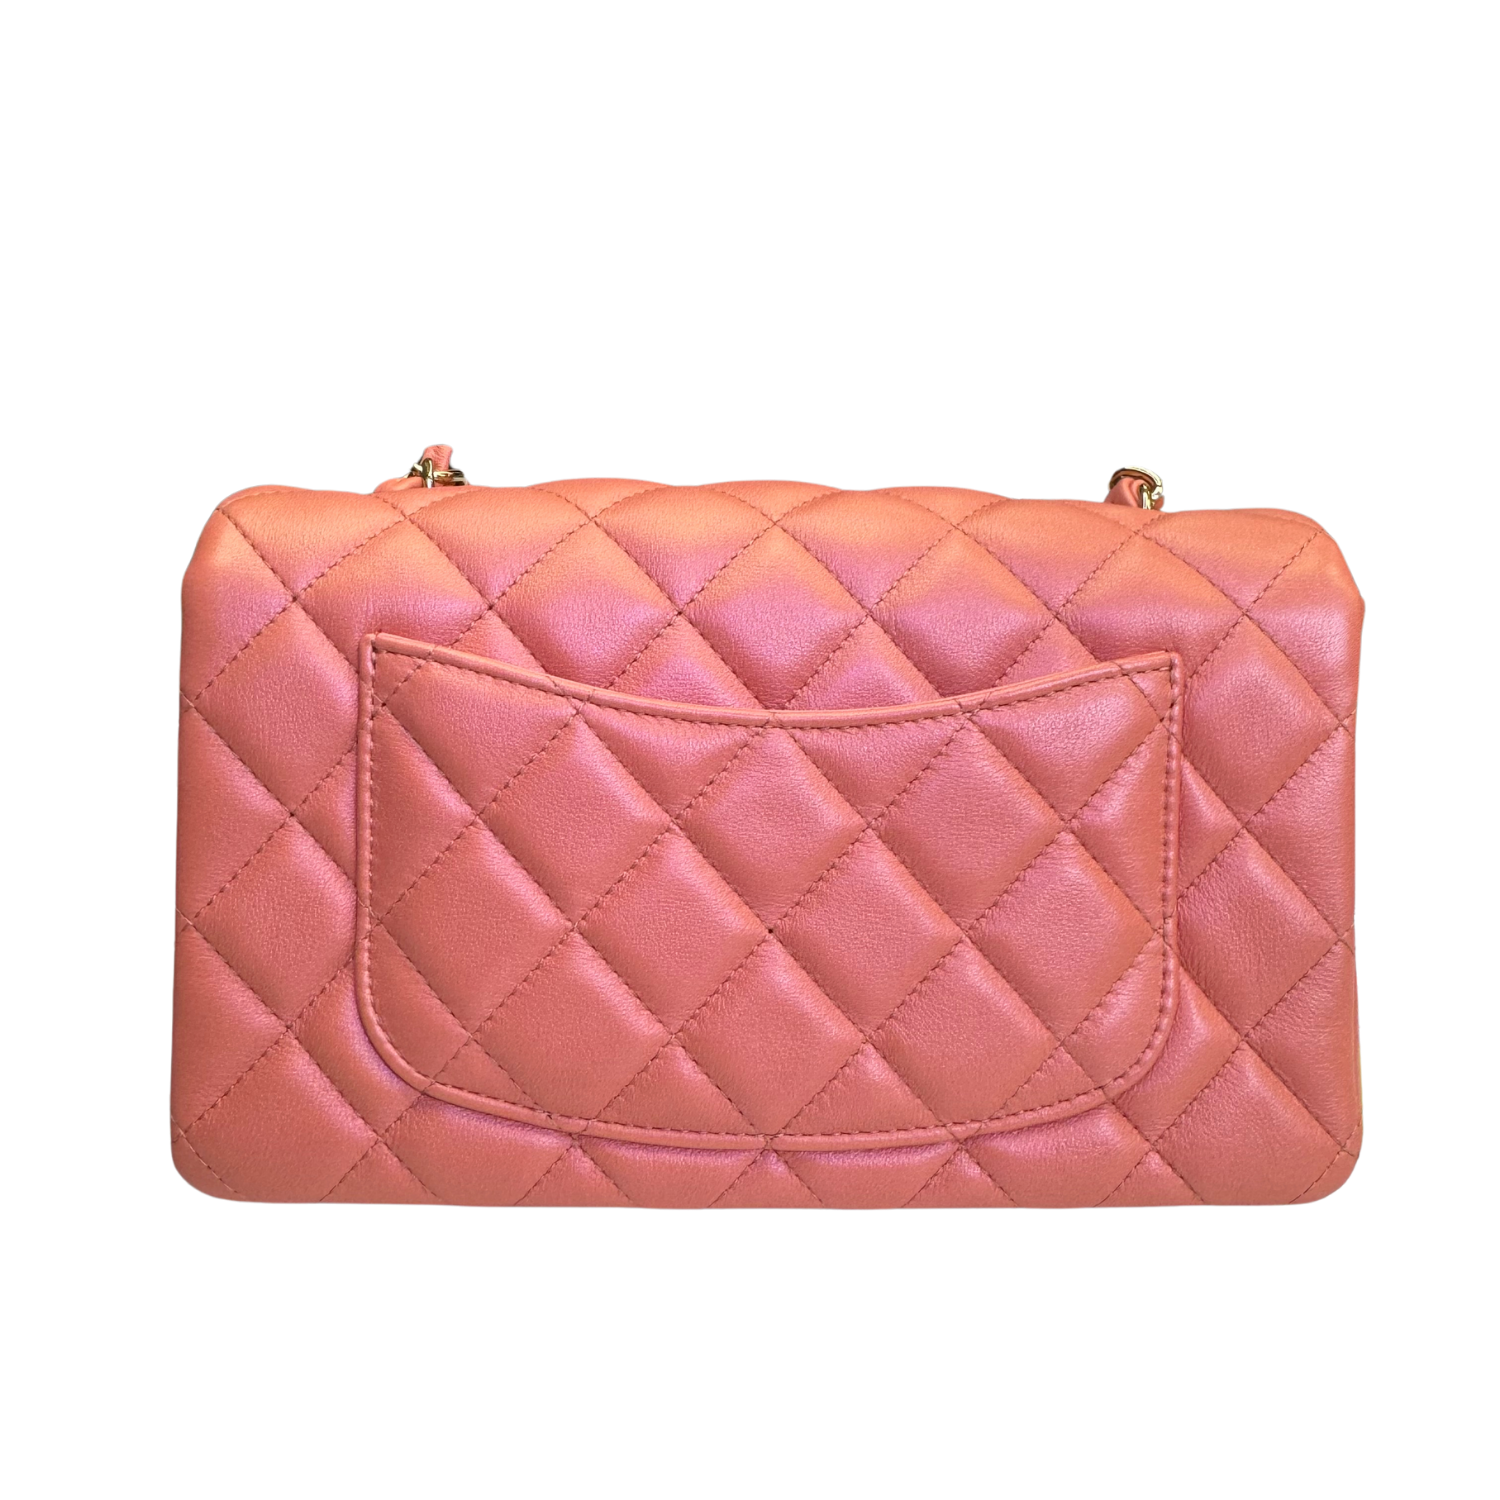 Chanel Classic Single Flap Bag Quilted Leather Mini Pink